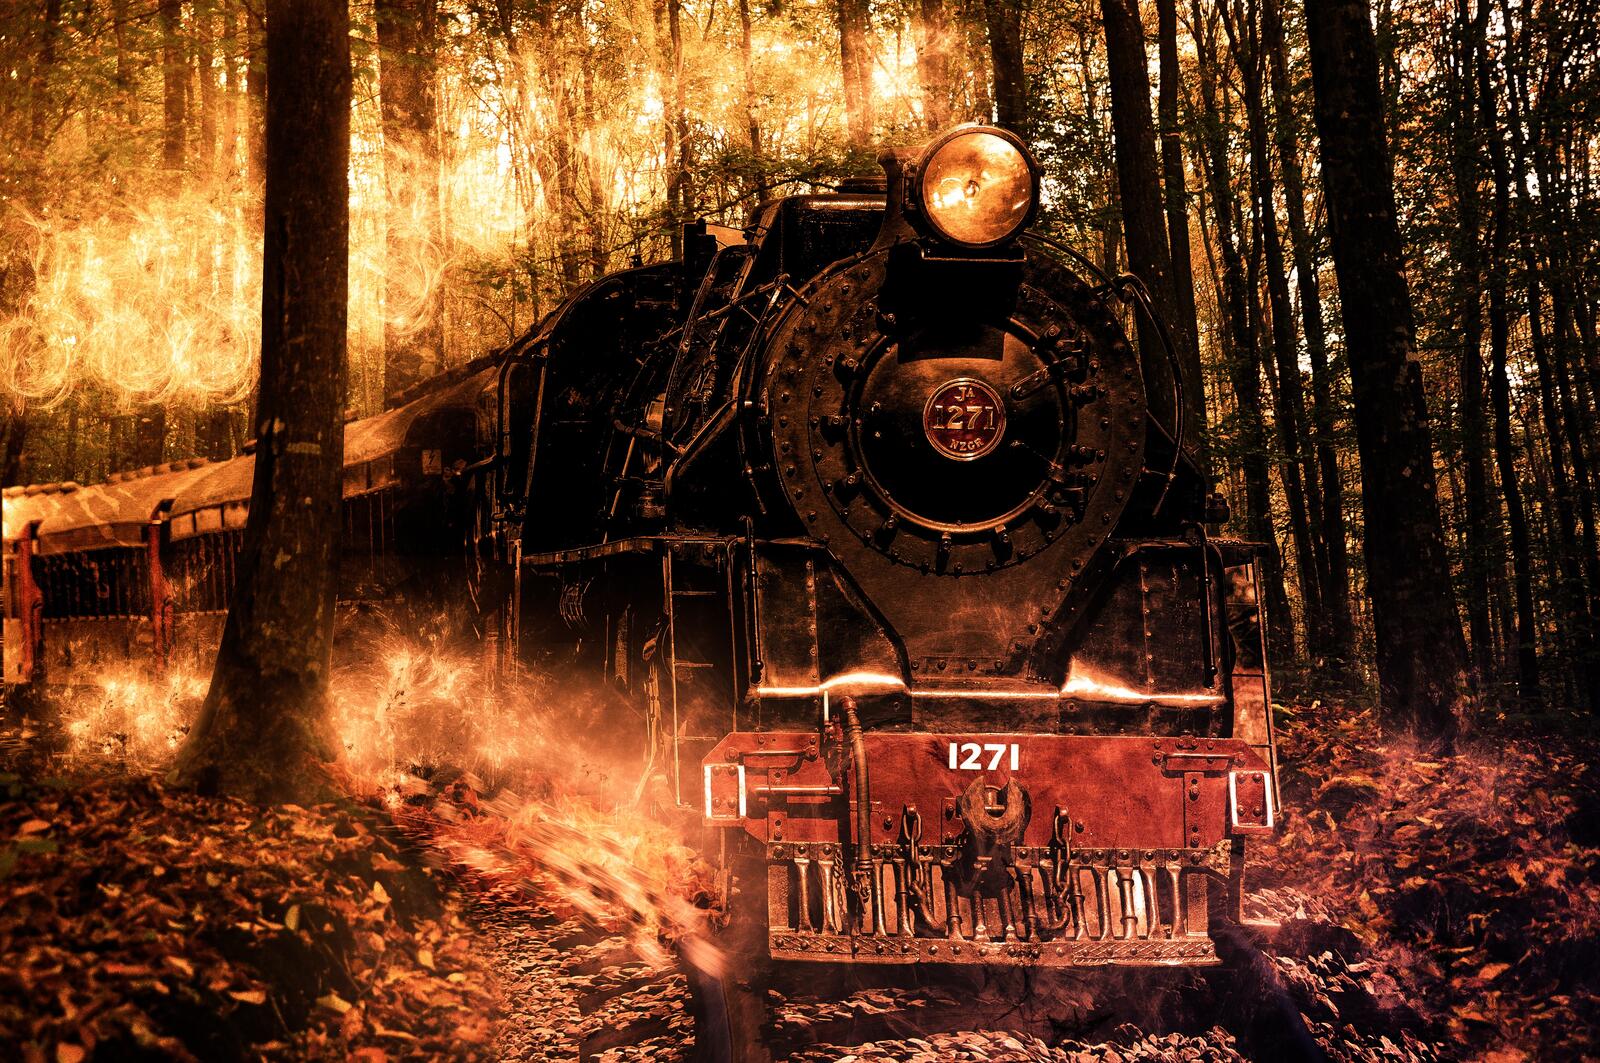 Free photo A fiery locomotive driving through the woods.